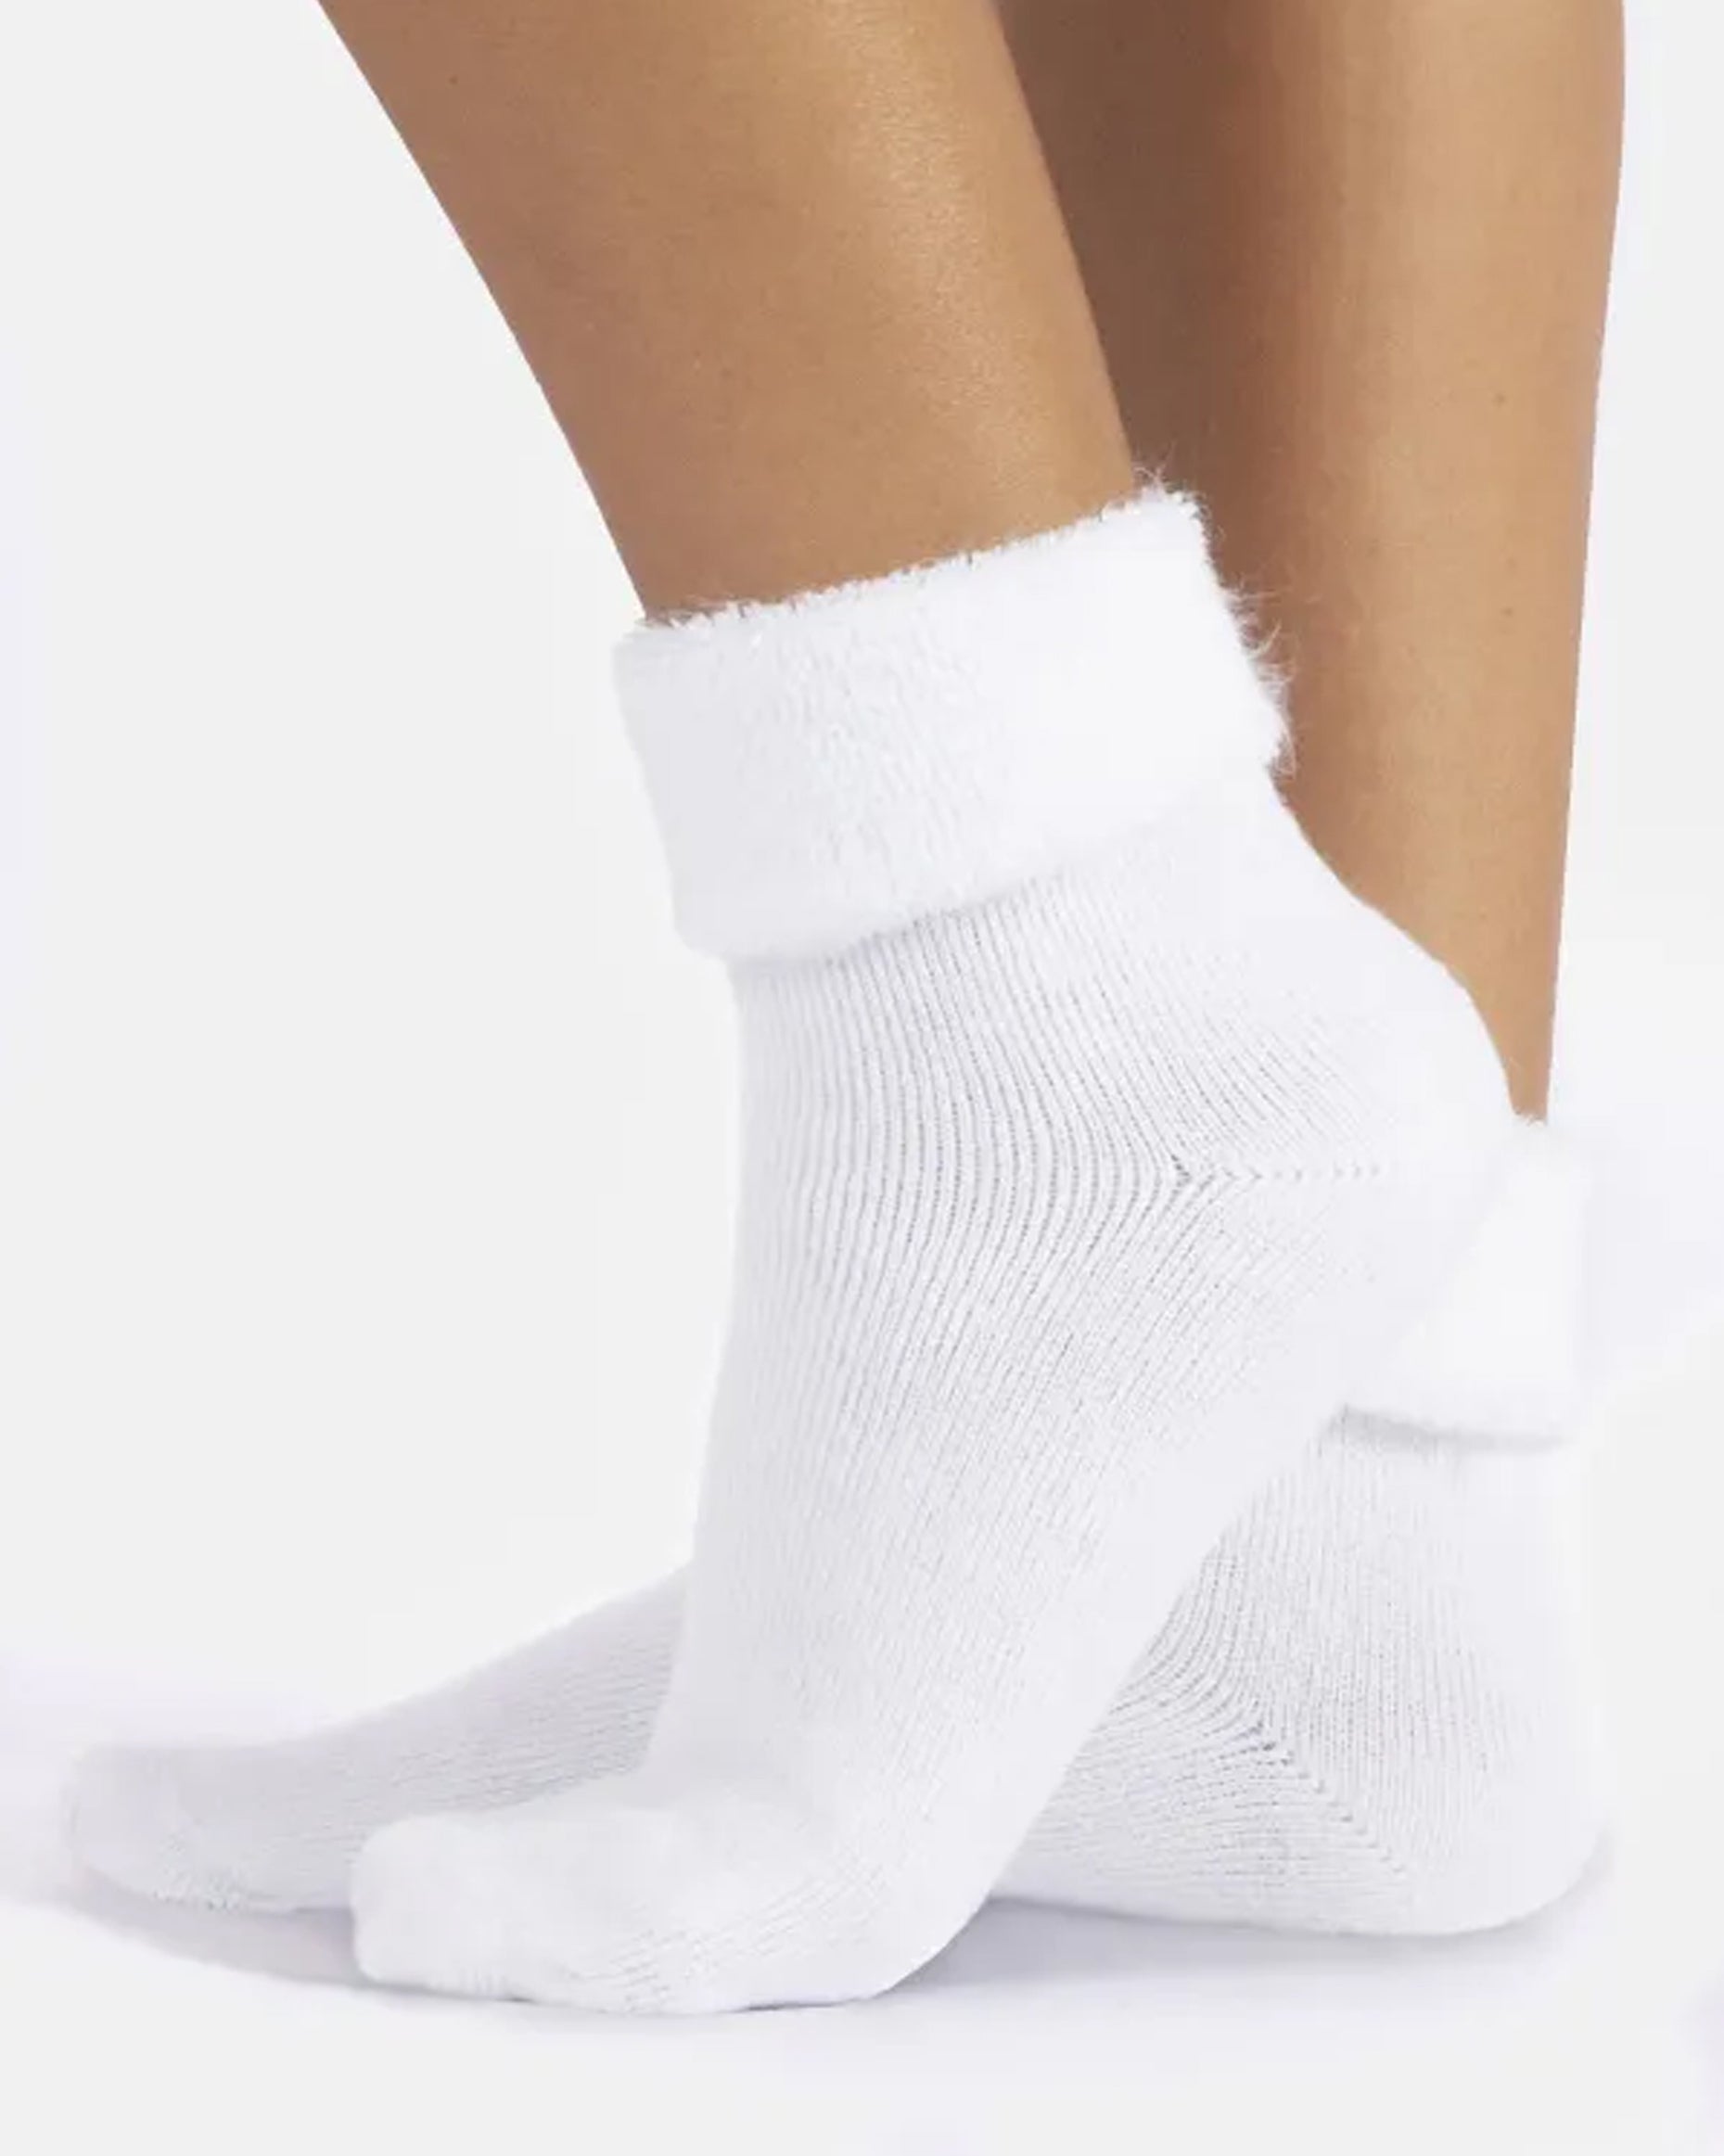 Calzitaly Angora Touch Socks - White thick and warm acrylic socks with a fluffy angora type terry lining with a turned down cuff.